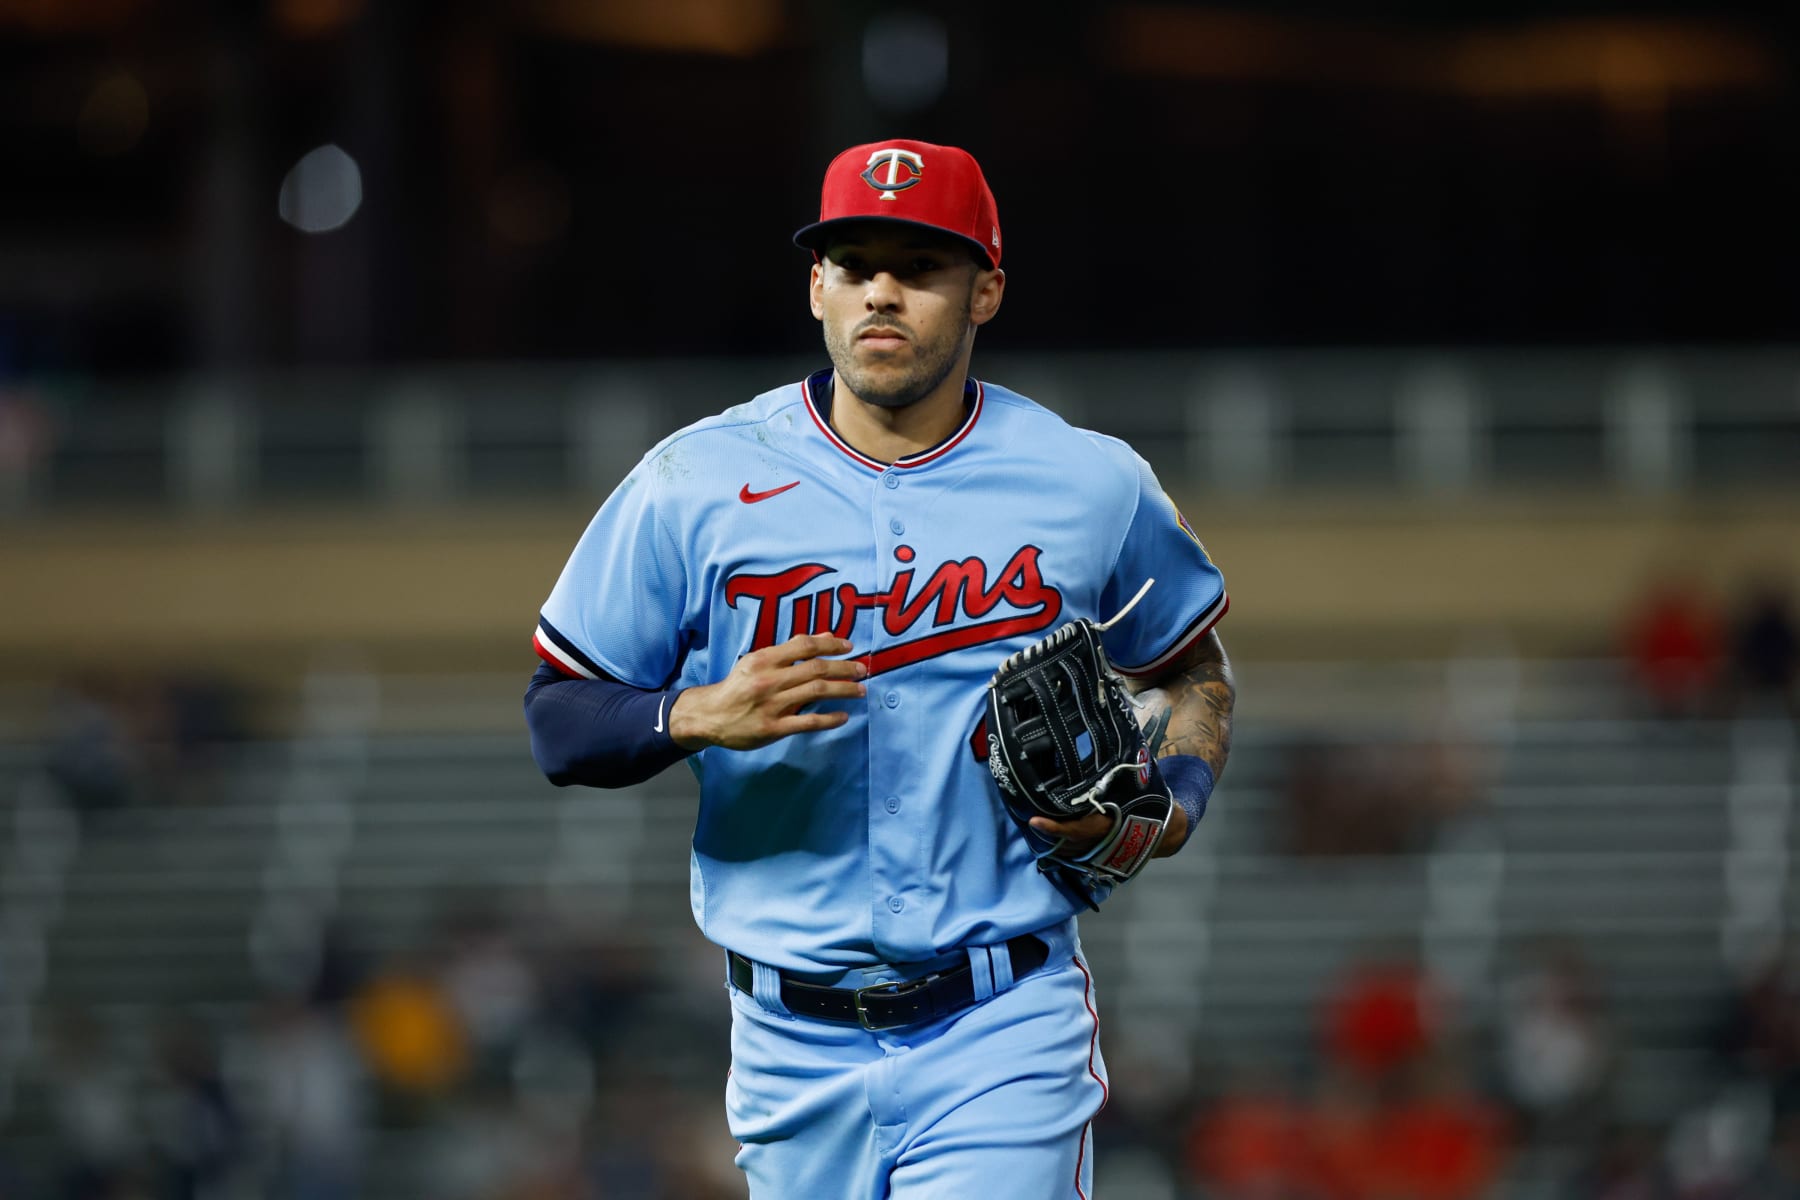 Carlos Correa comes to terms with Twins, leaving the Mets behind